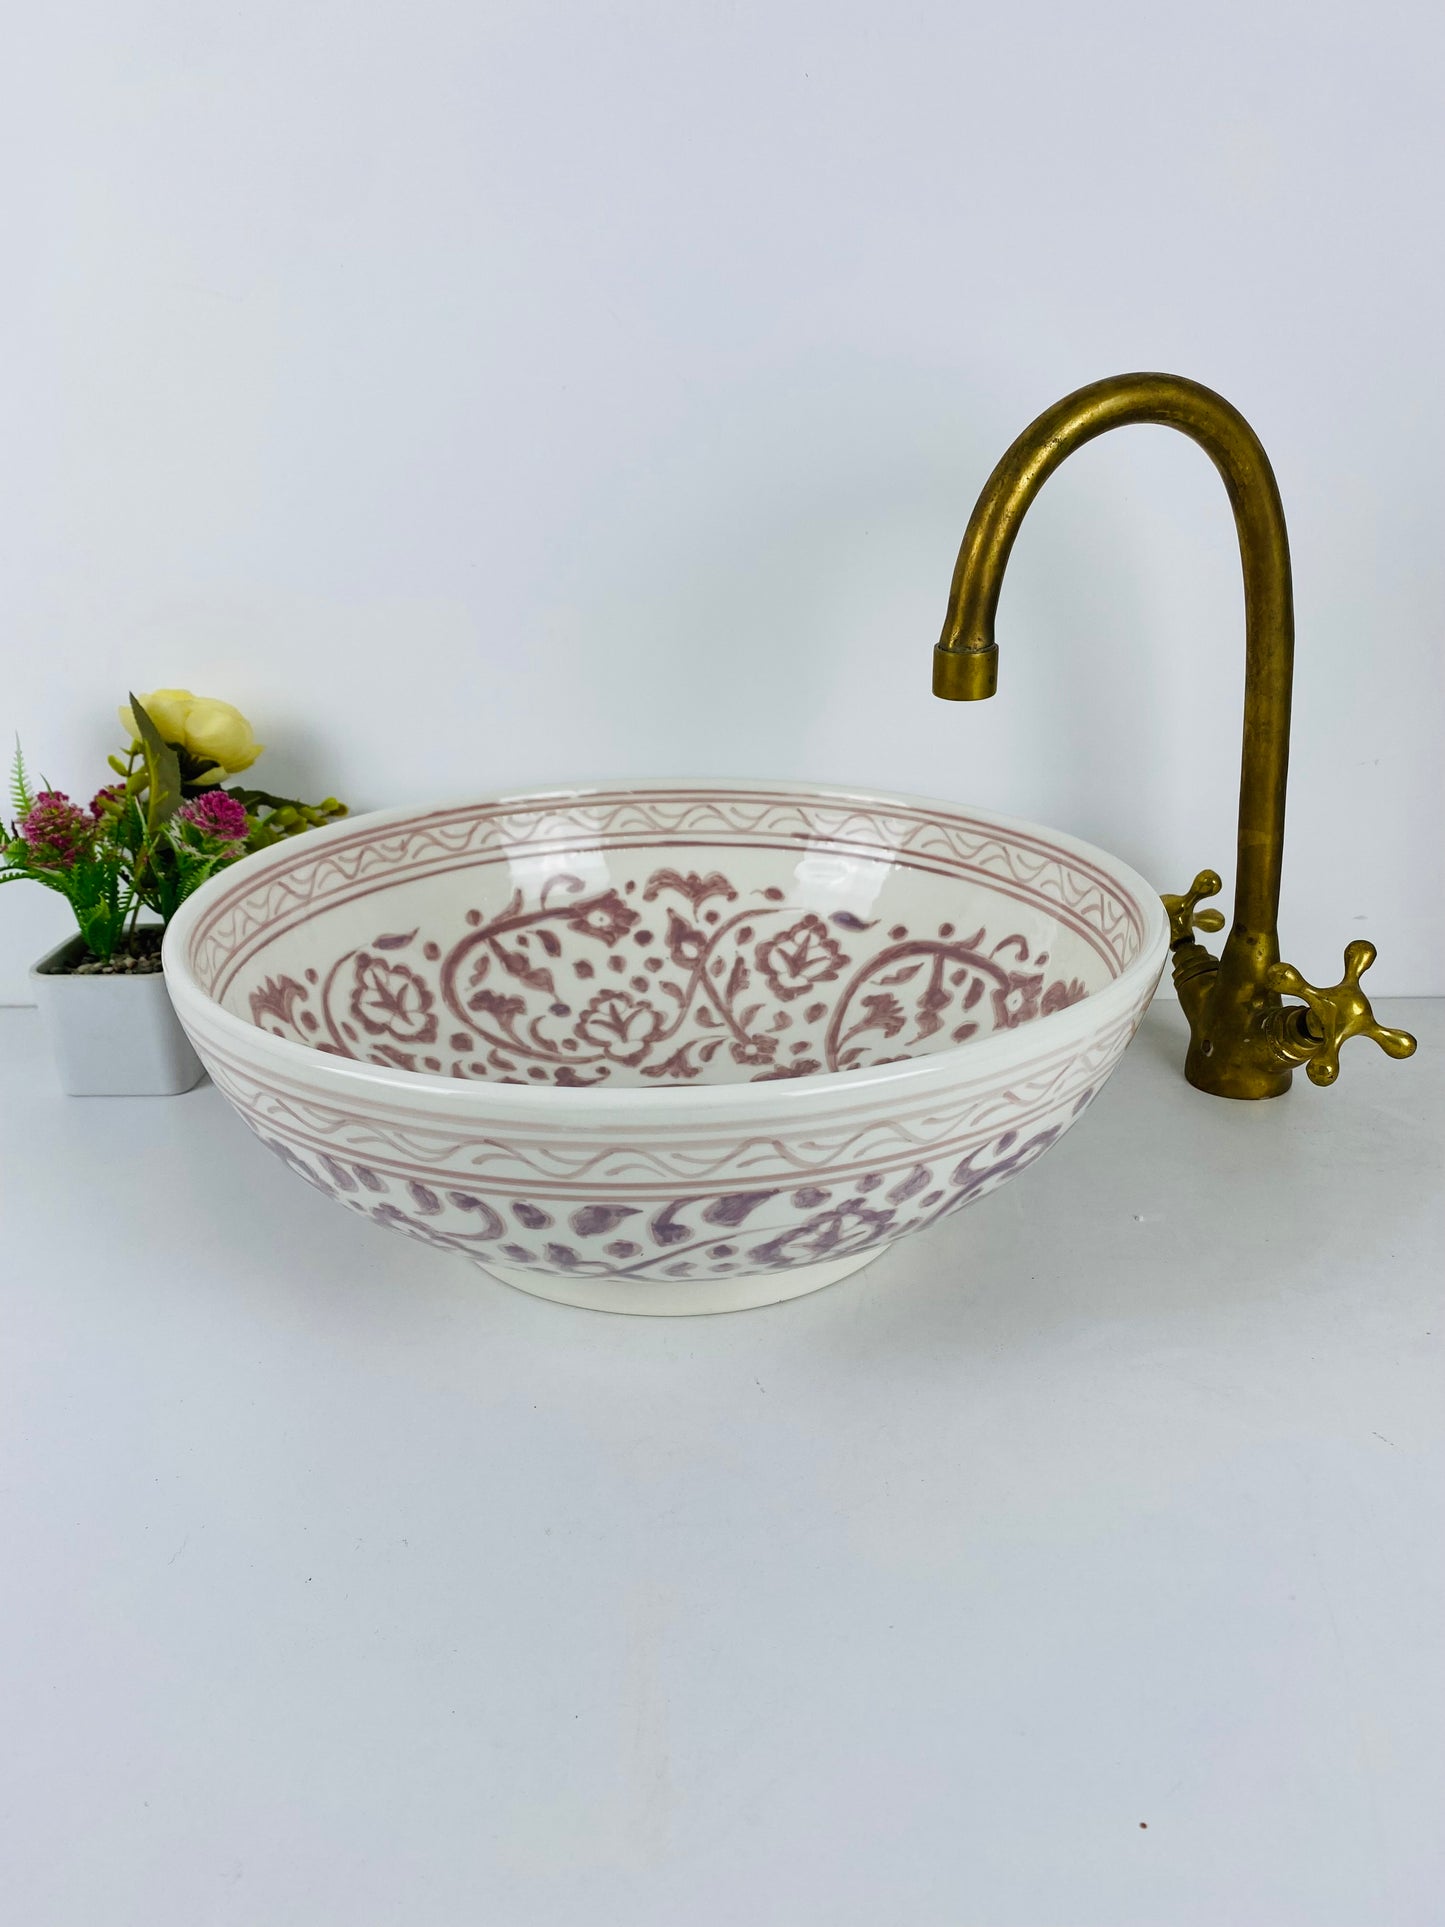 Ivory Petals: Handcrafted Ceramic Sink with White Base and Crepe Color Floral Accents